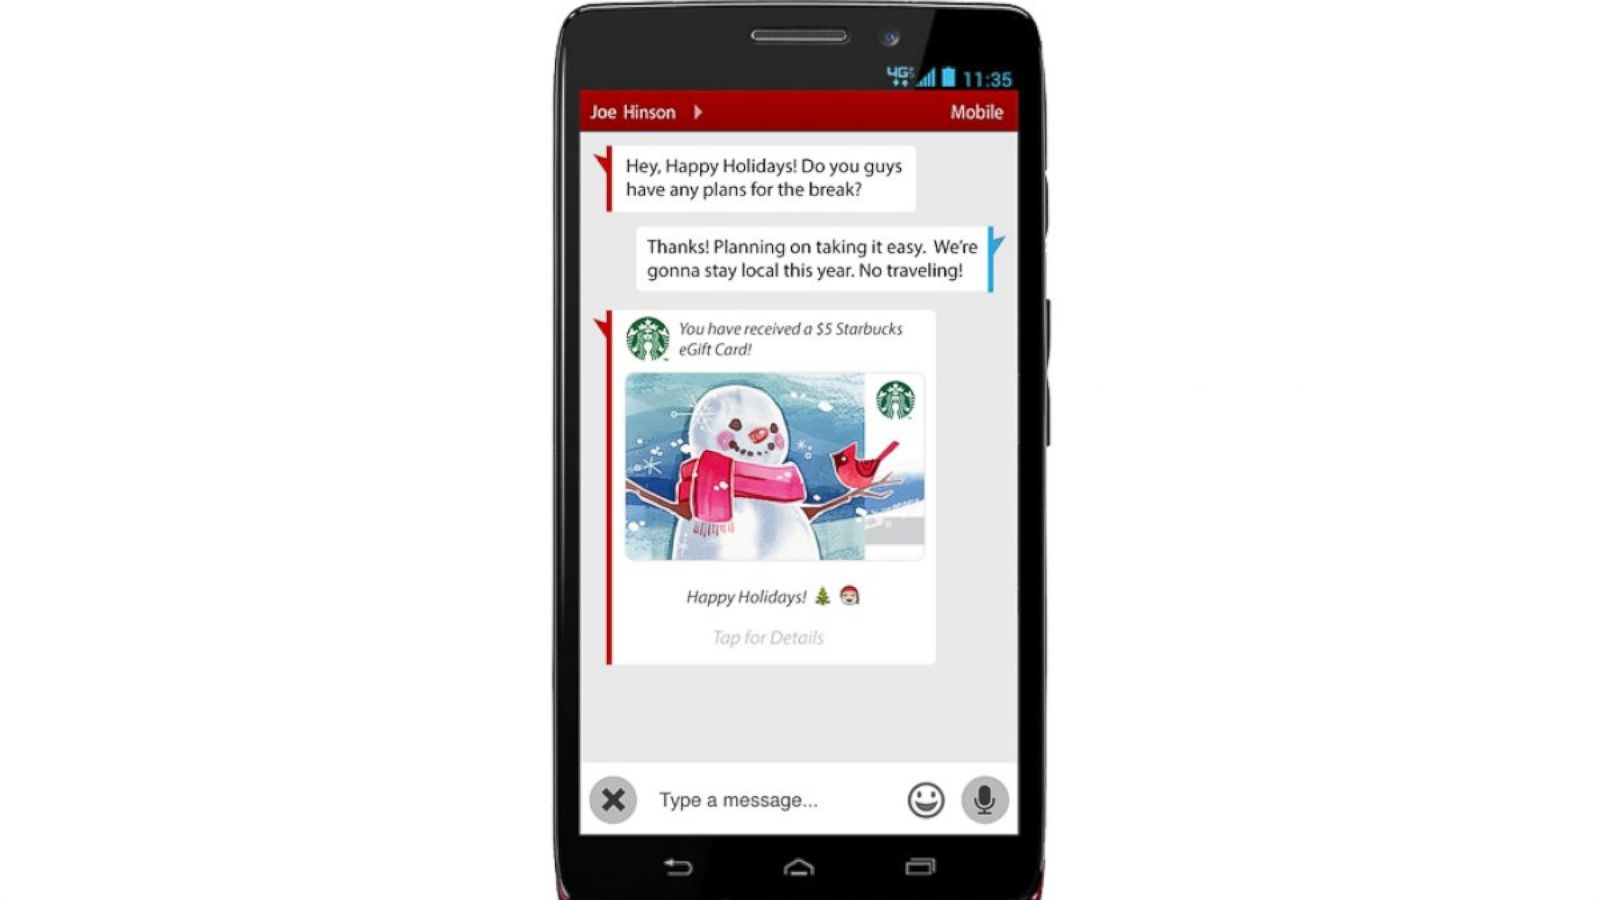 How to Send Starbucks Gift Card Via Text Android? 